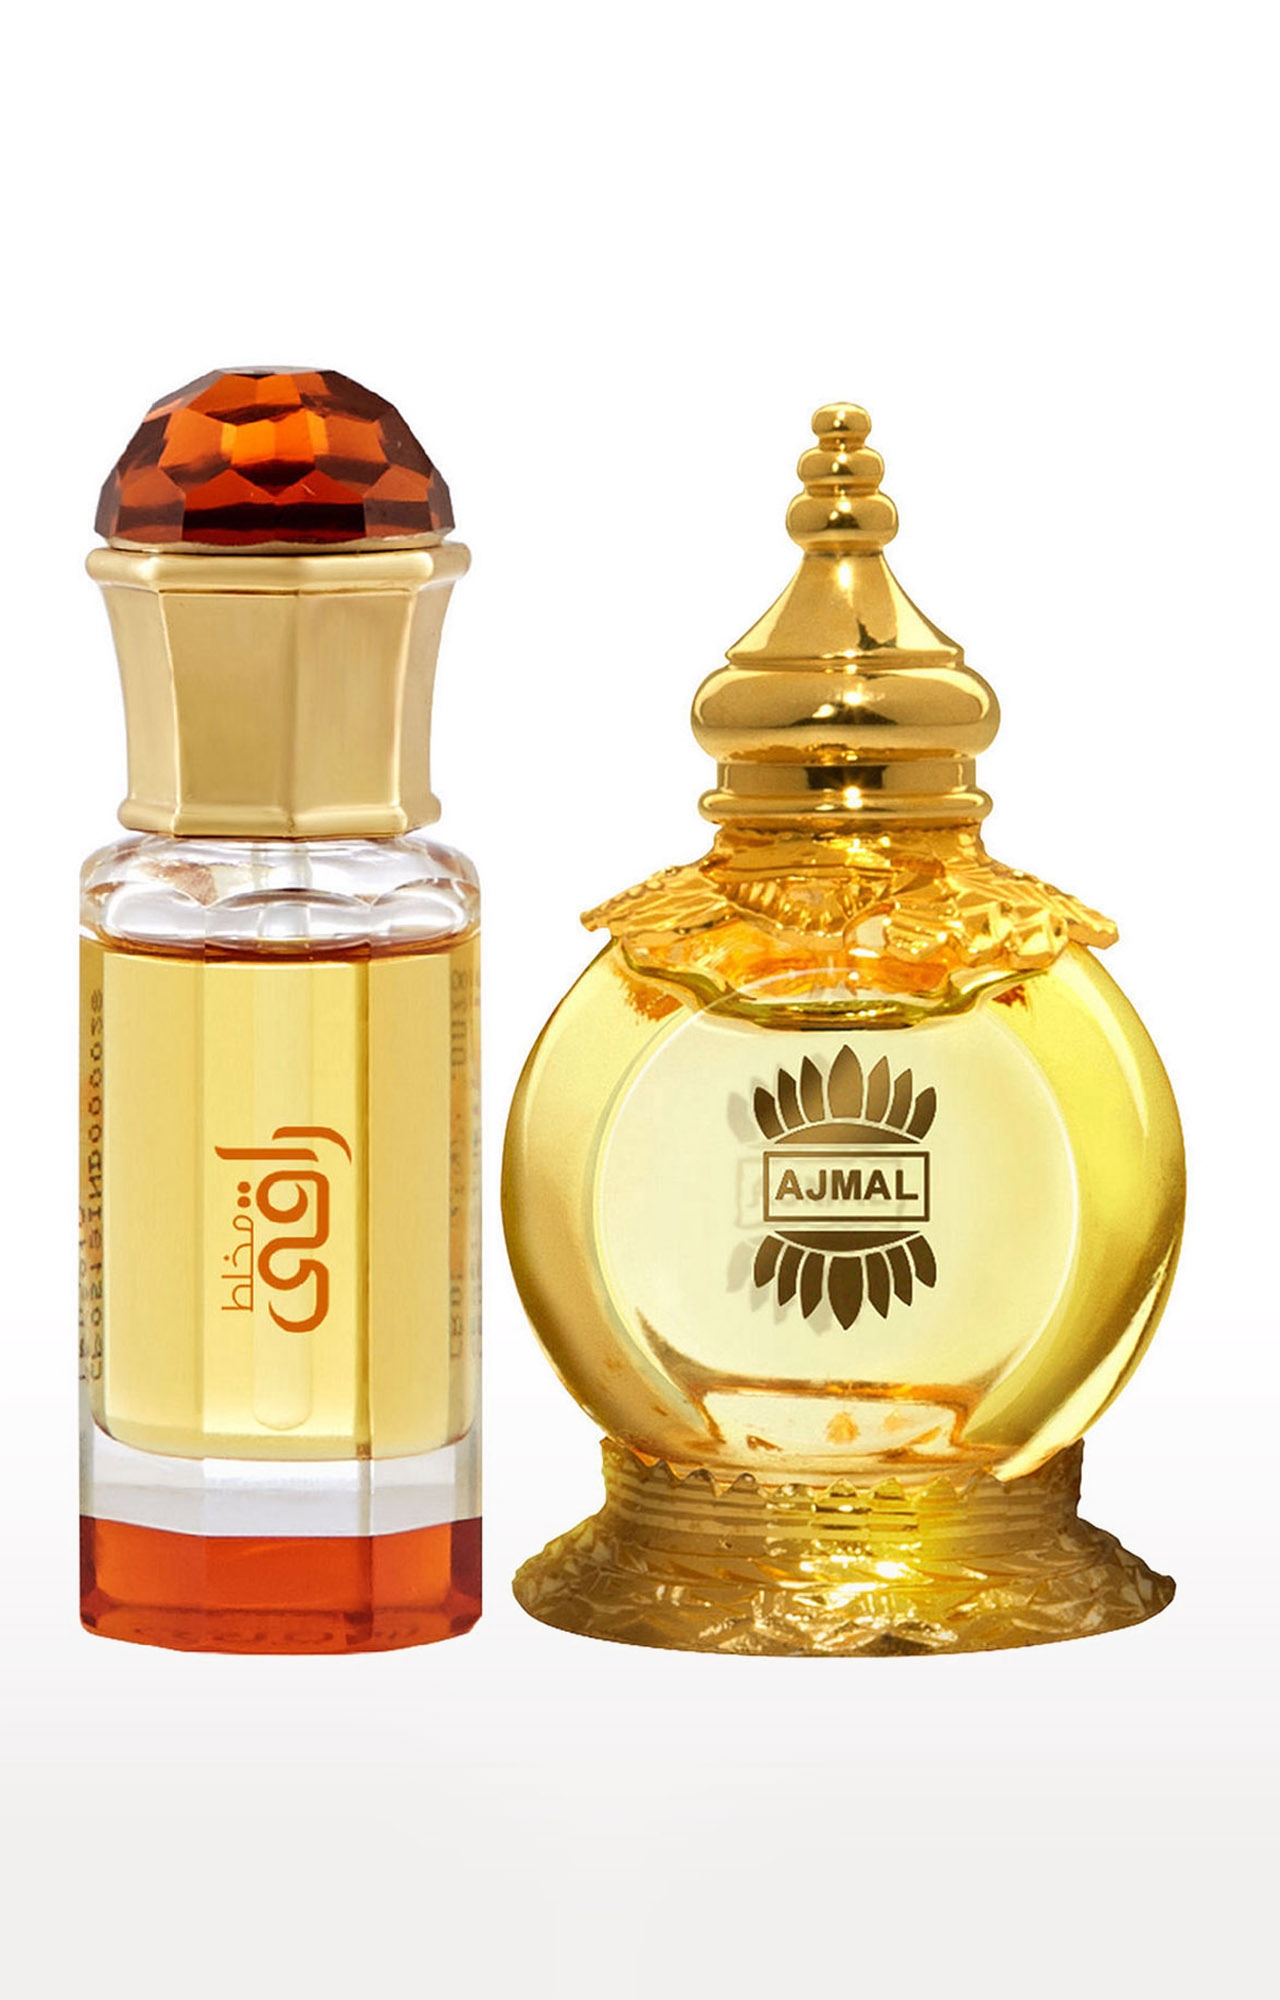 Ajmal Mukhallat Raaqi Concentrated Perfume Oil Alcohol-free Attar 10ml for Unisex and Mukhallat AL Wafa Concentrated Perfume Oil Oriental Musky Alcohol-free Attar 12ml for Unisex